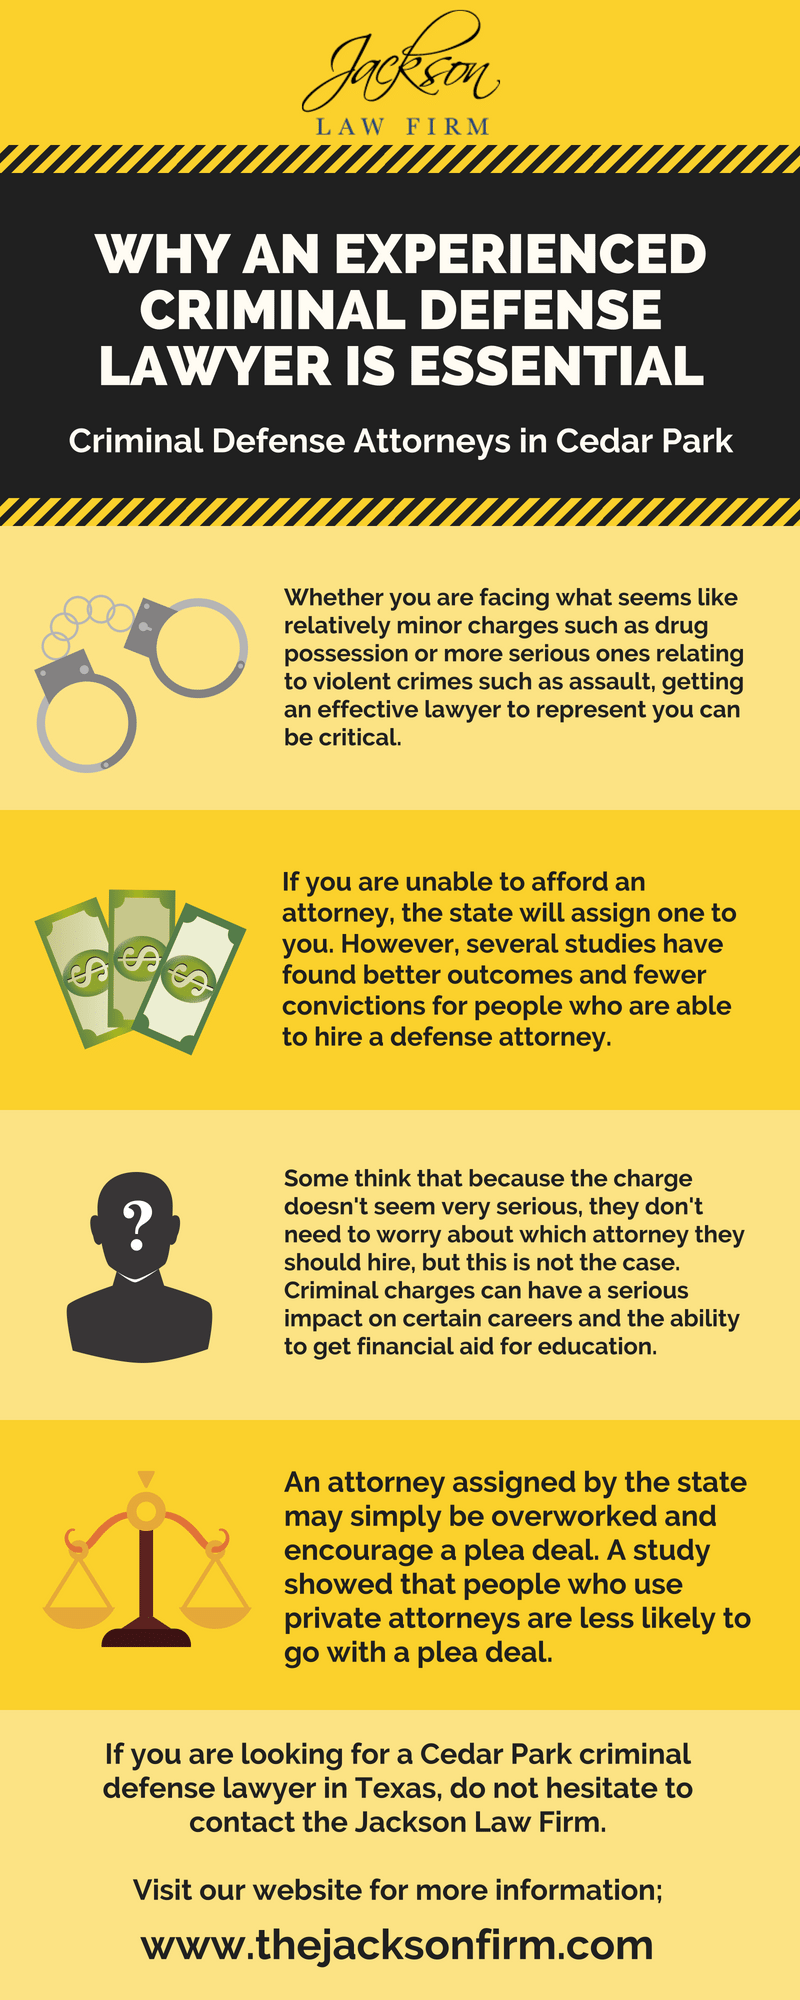 Infographic showing why hiring an experienced Criminal Defense Lawyer is essential